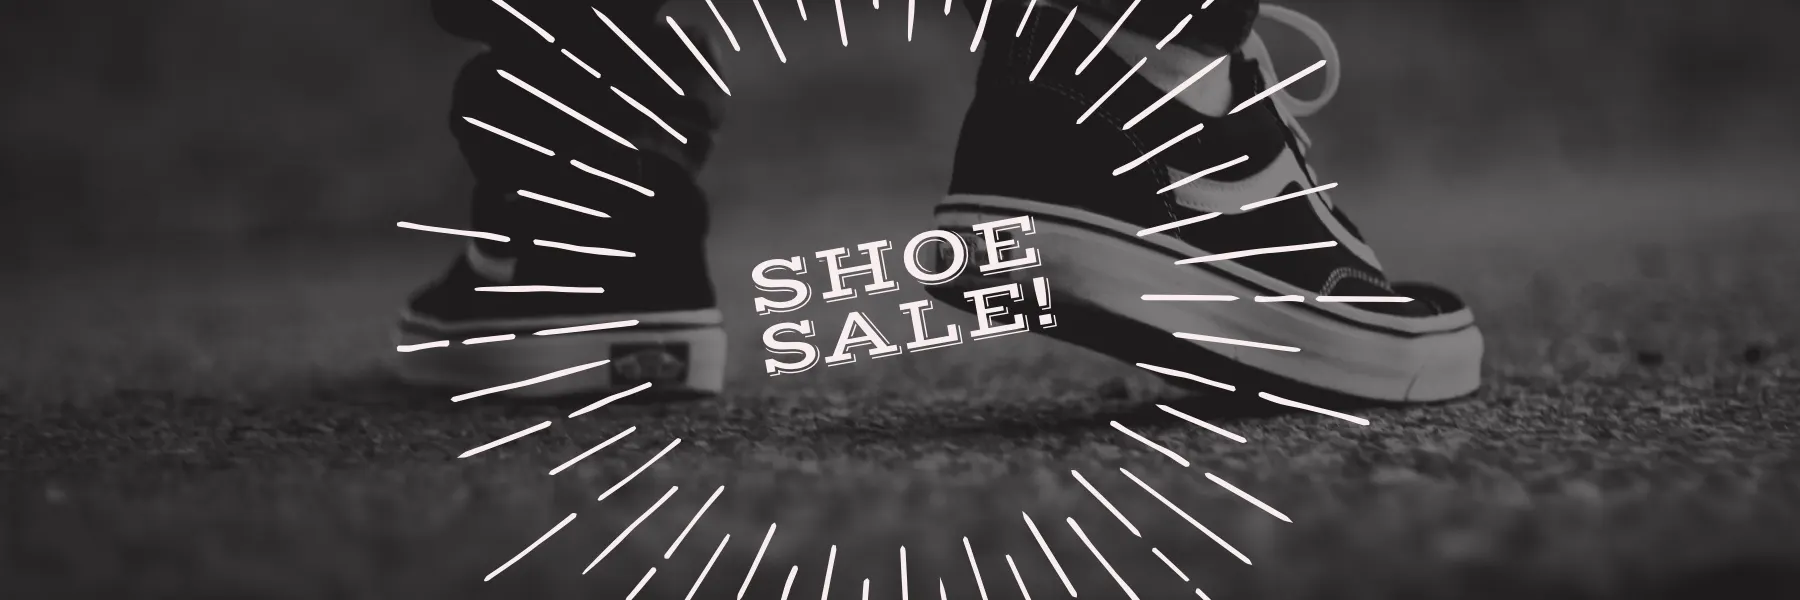 Black and White Shoe Sale Banner